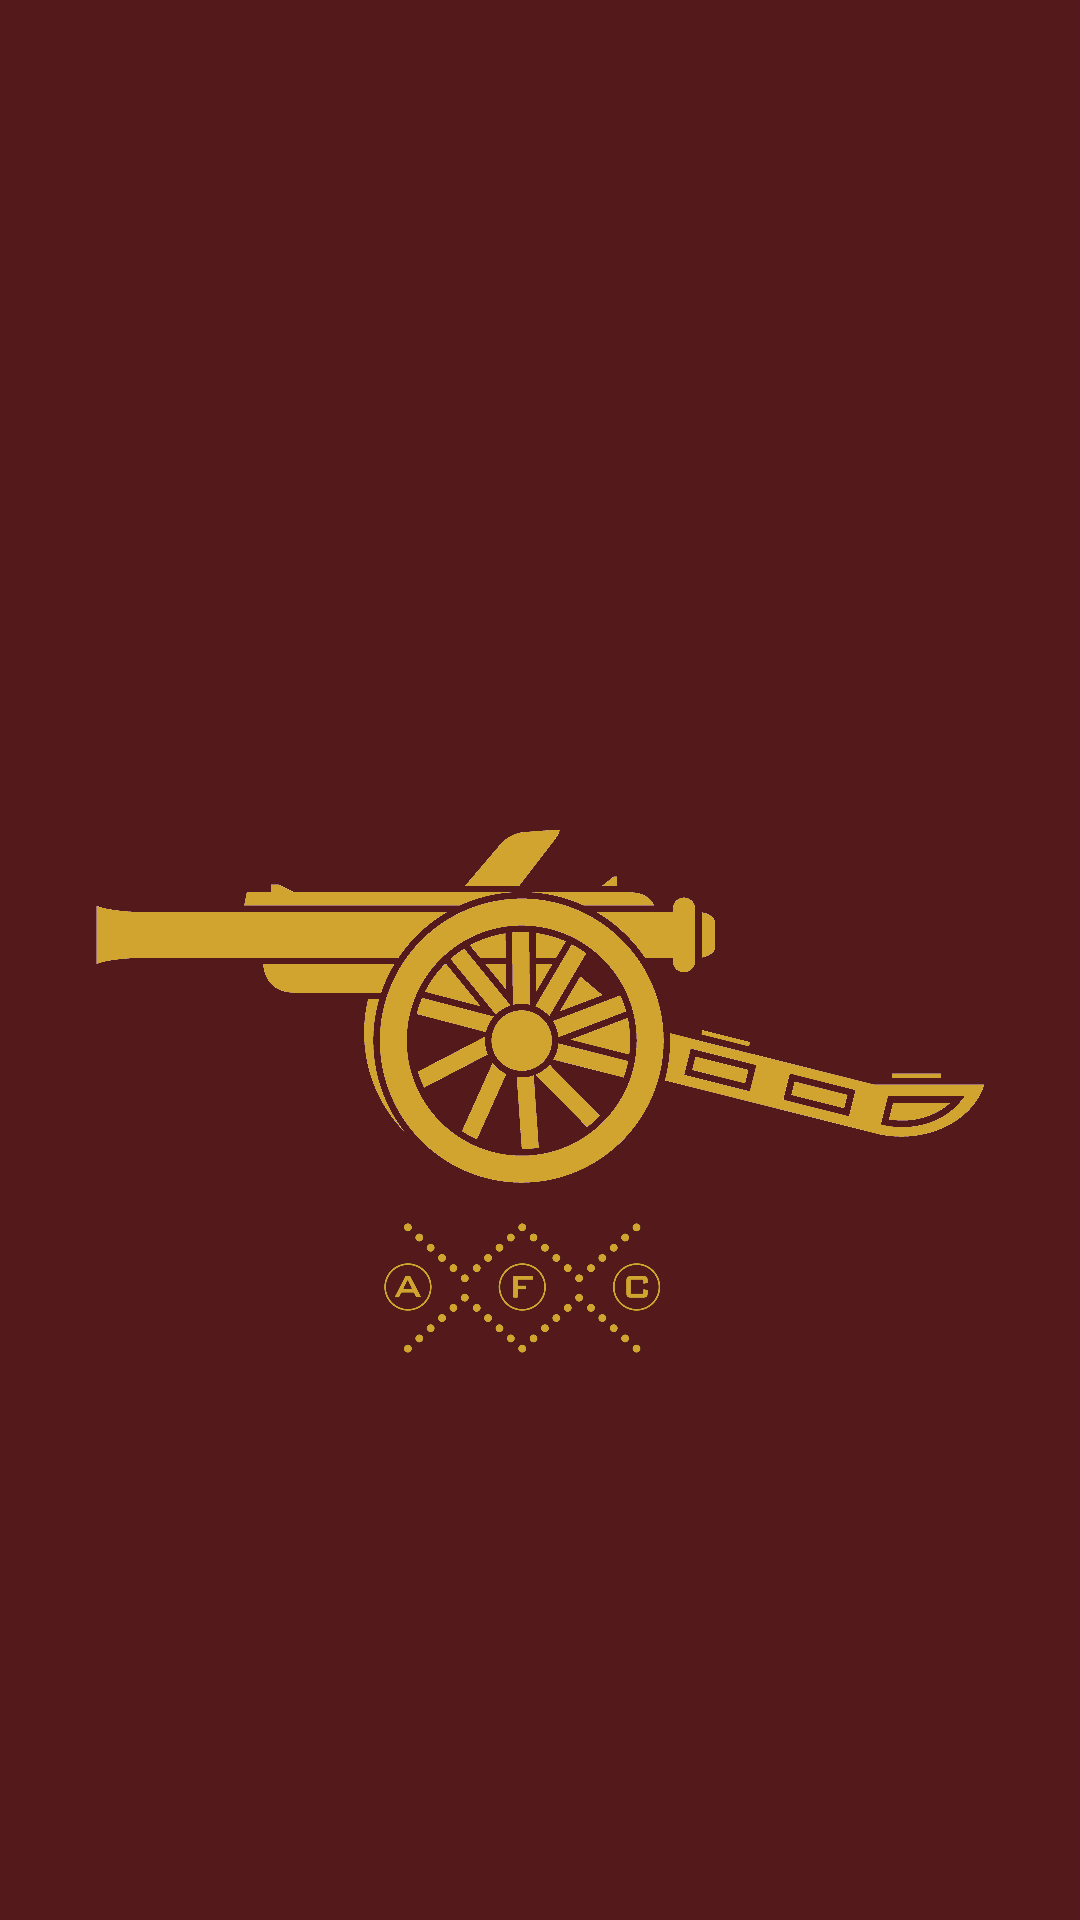 Arsenal Wallpapers 73 pictures